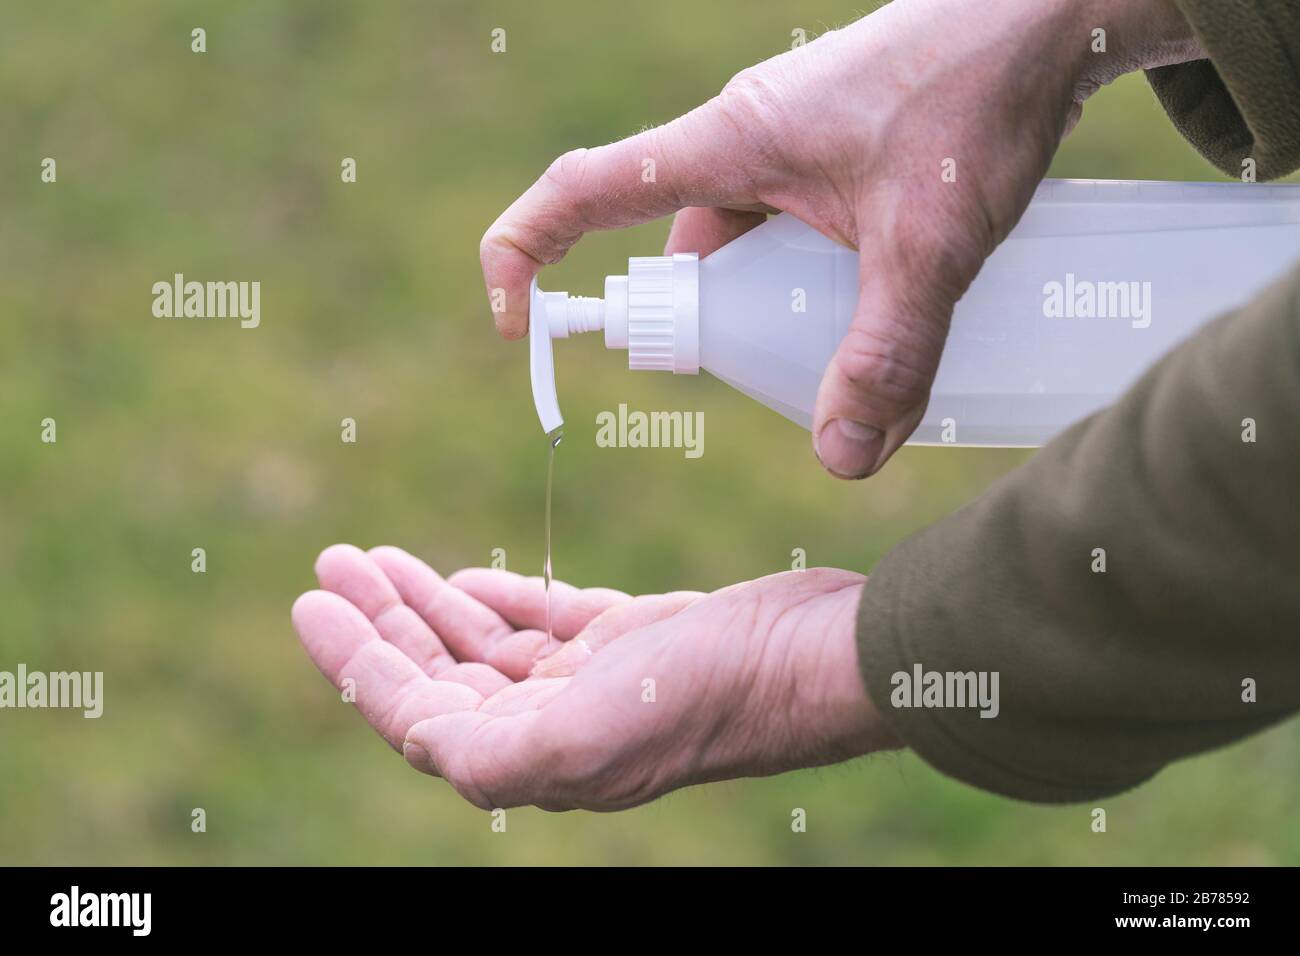 Using alcohol gel sanitizer to clean or wash hands. Anti virus bacteria protection against Corona virus convid19.  Protection outdoors against virus i Stock Photo